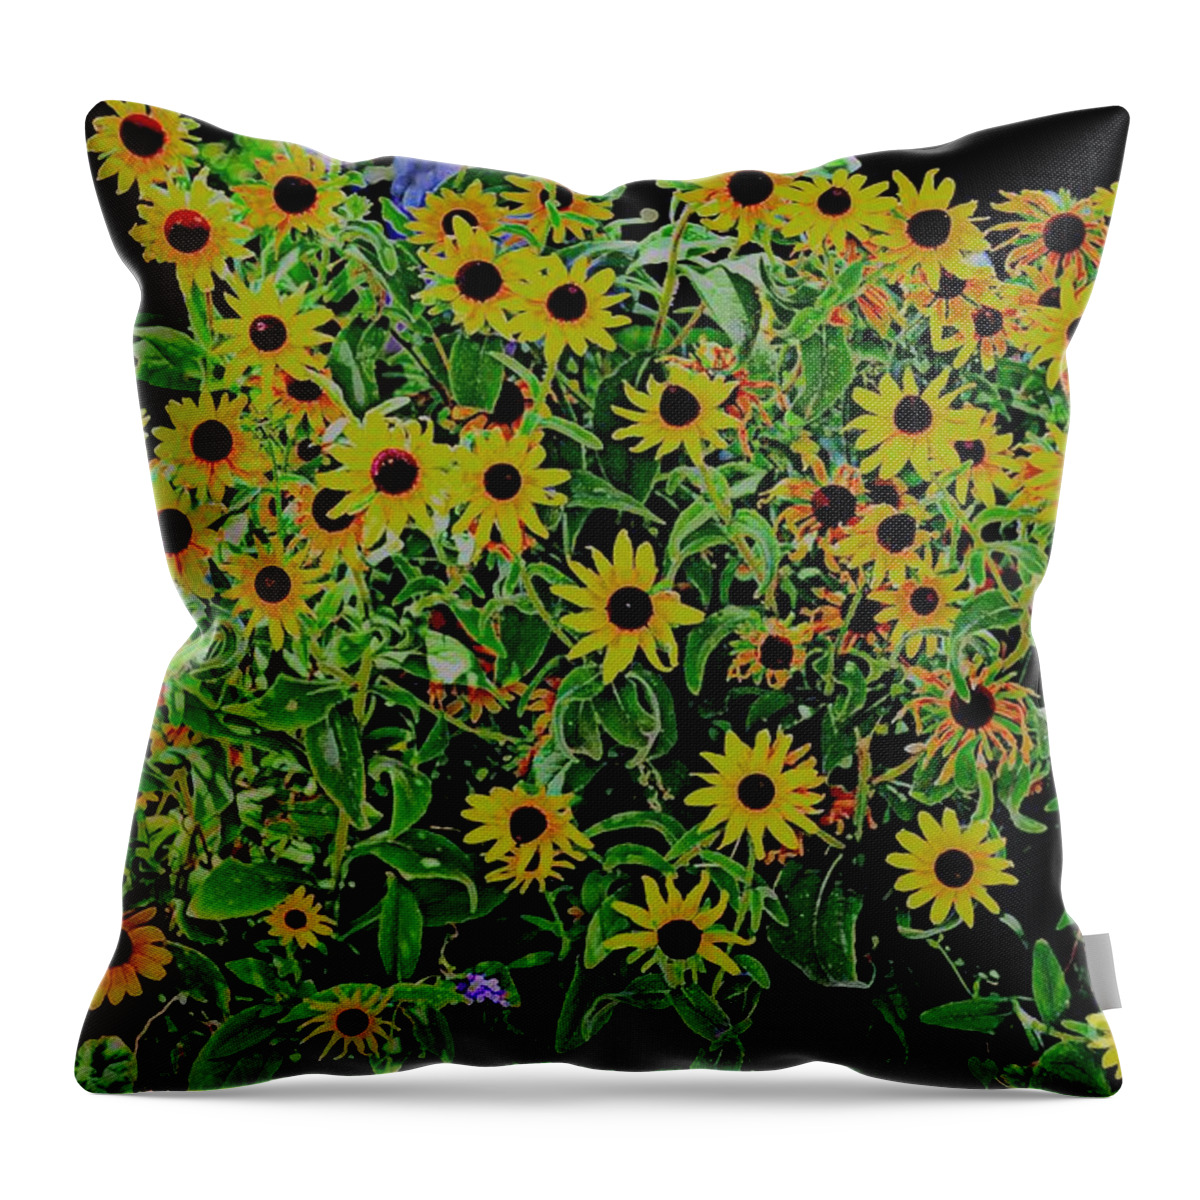 Botanical Throw Pillow featuring the photograph Black Eyes 3 by Diane montana Jansson